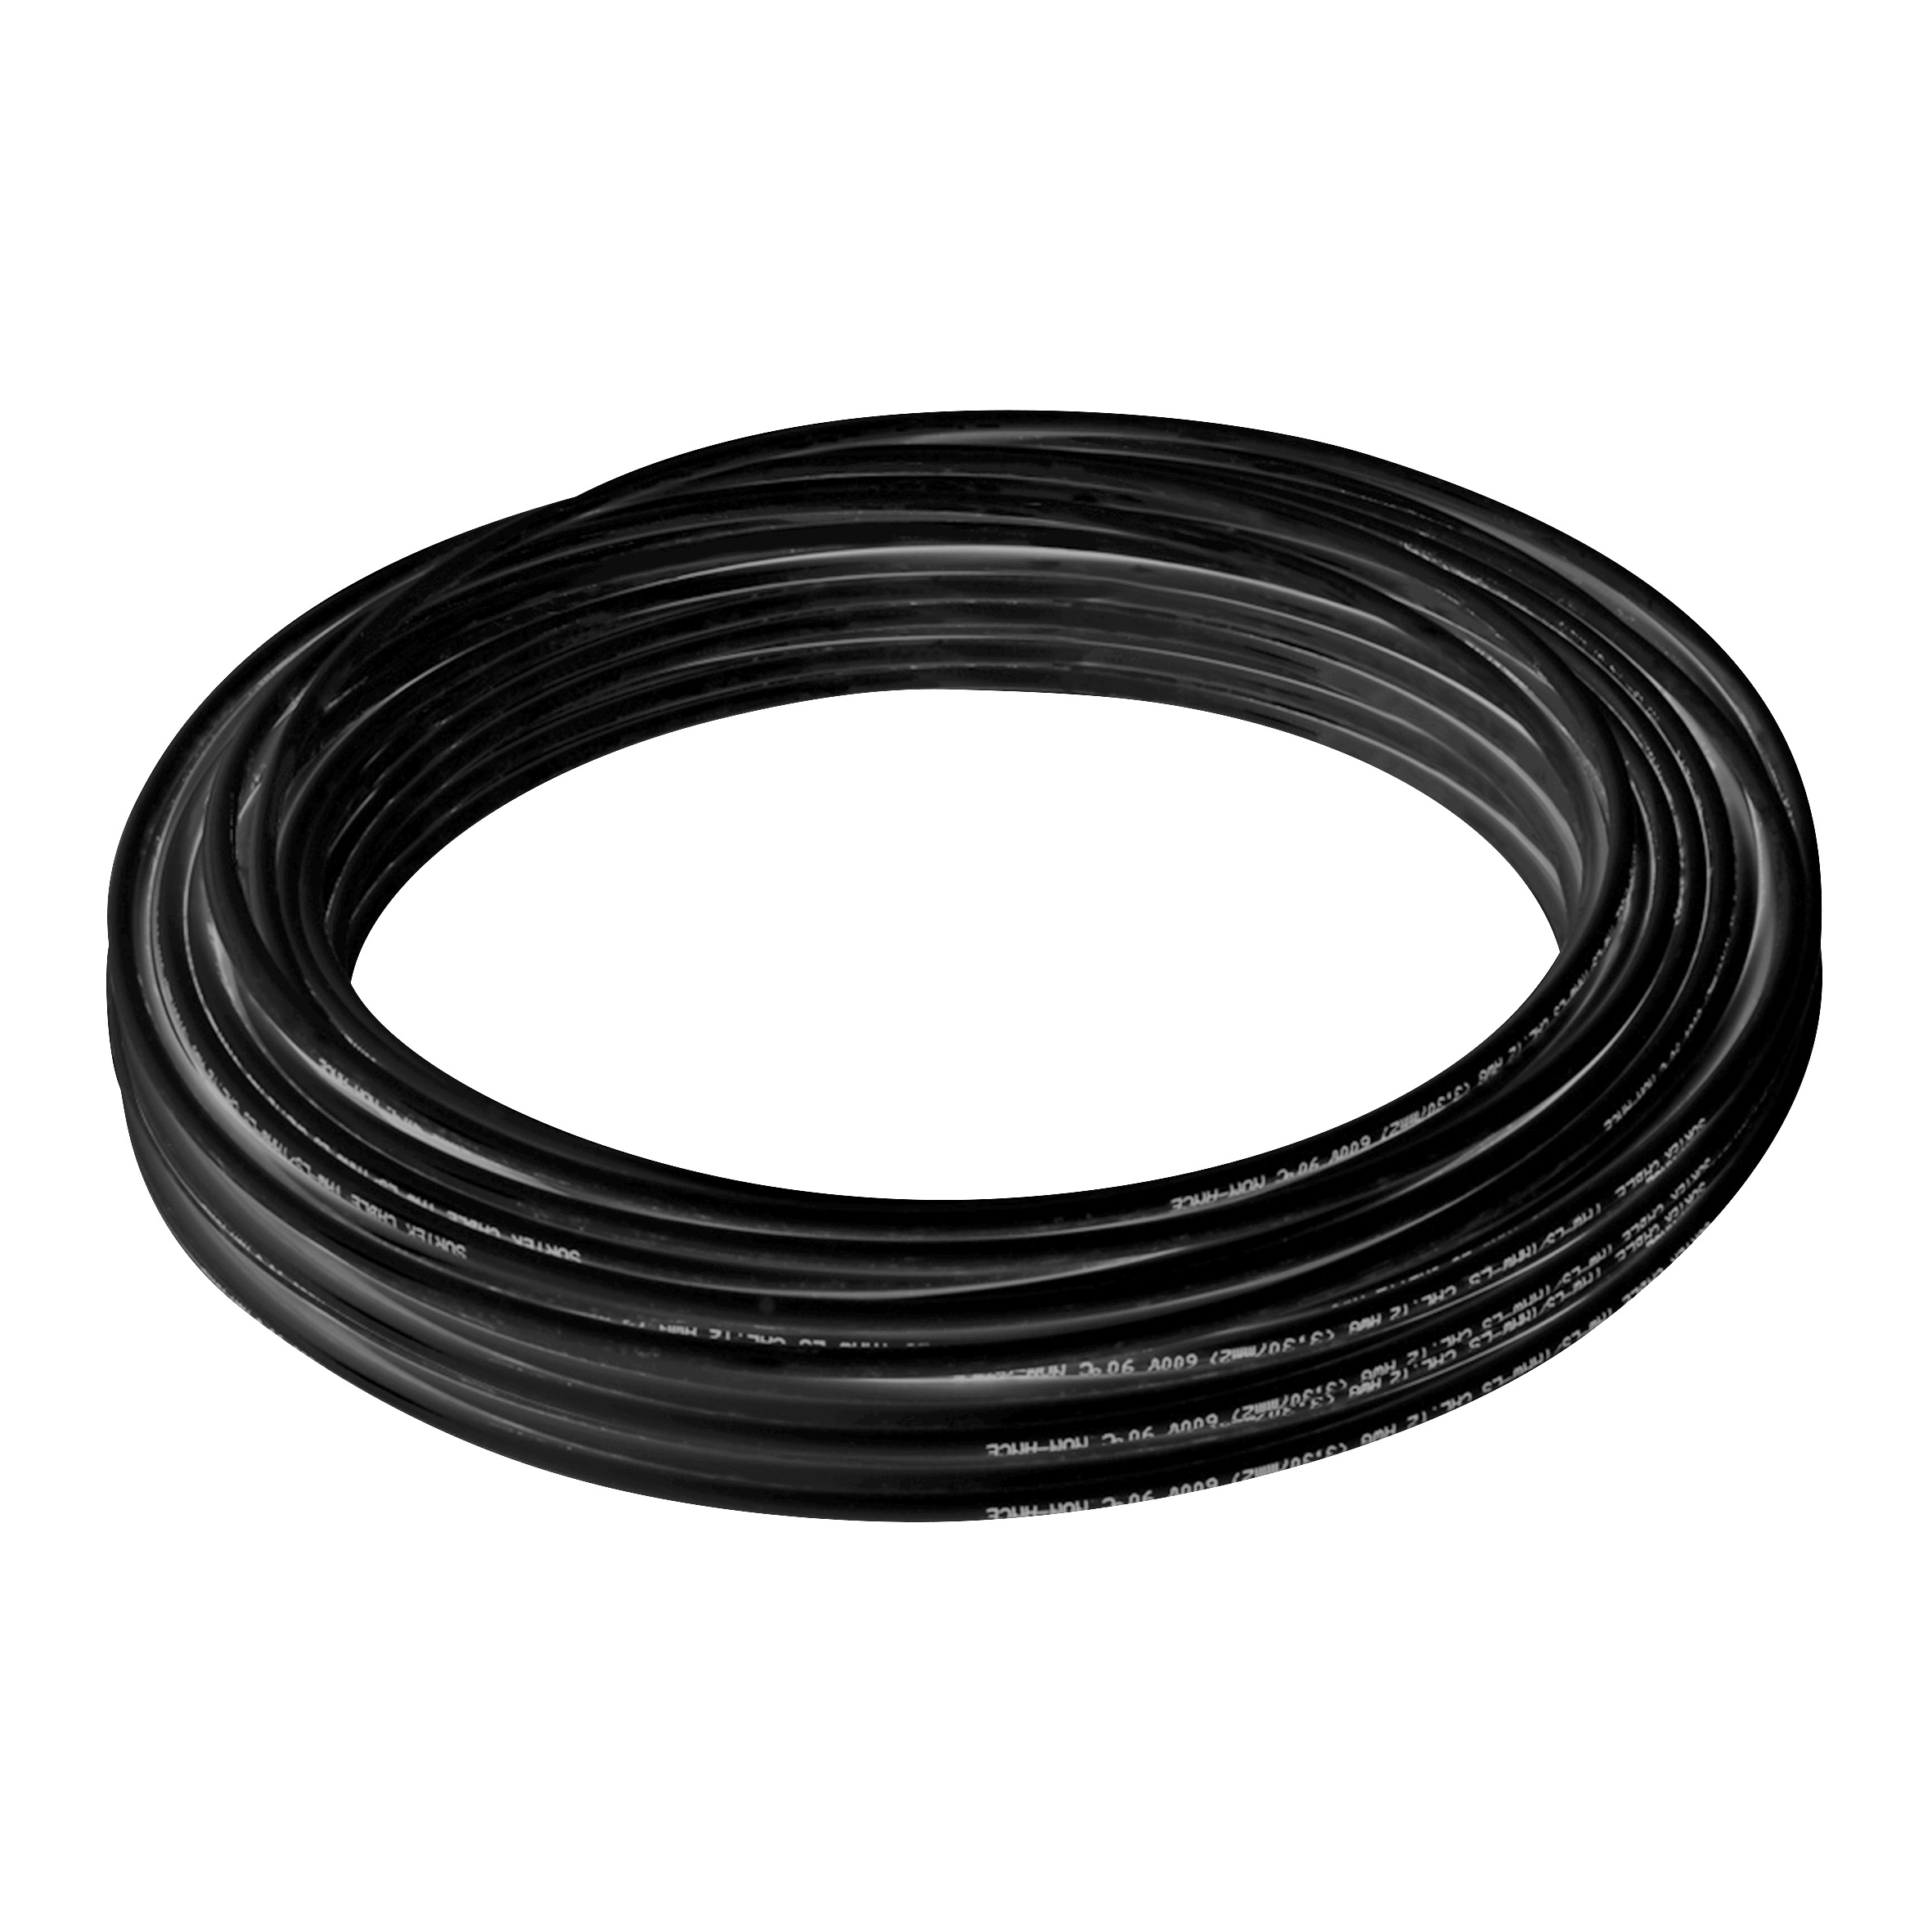 Cable eléctrico tipo THW-LS / THHW-LS Cal.8 100m negro